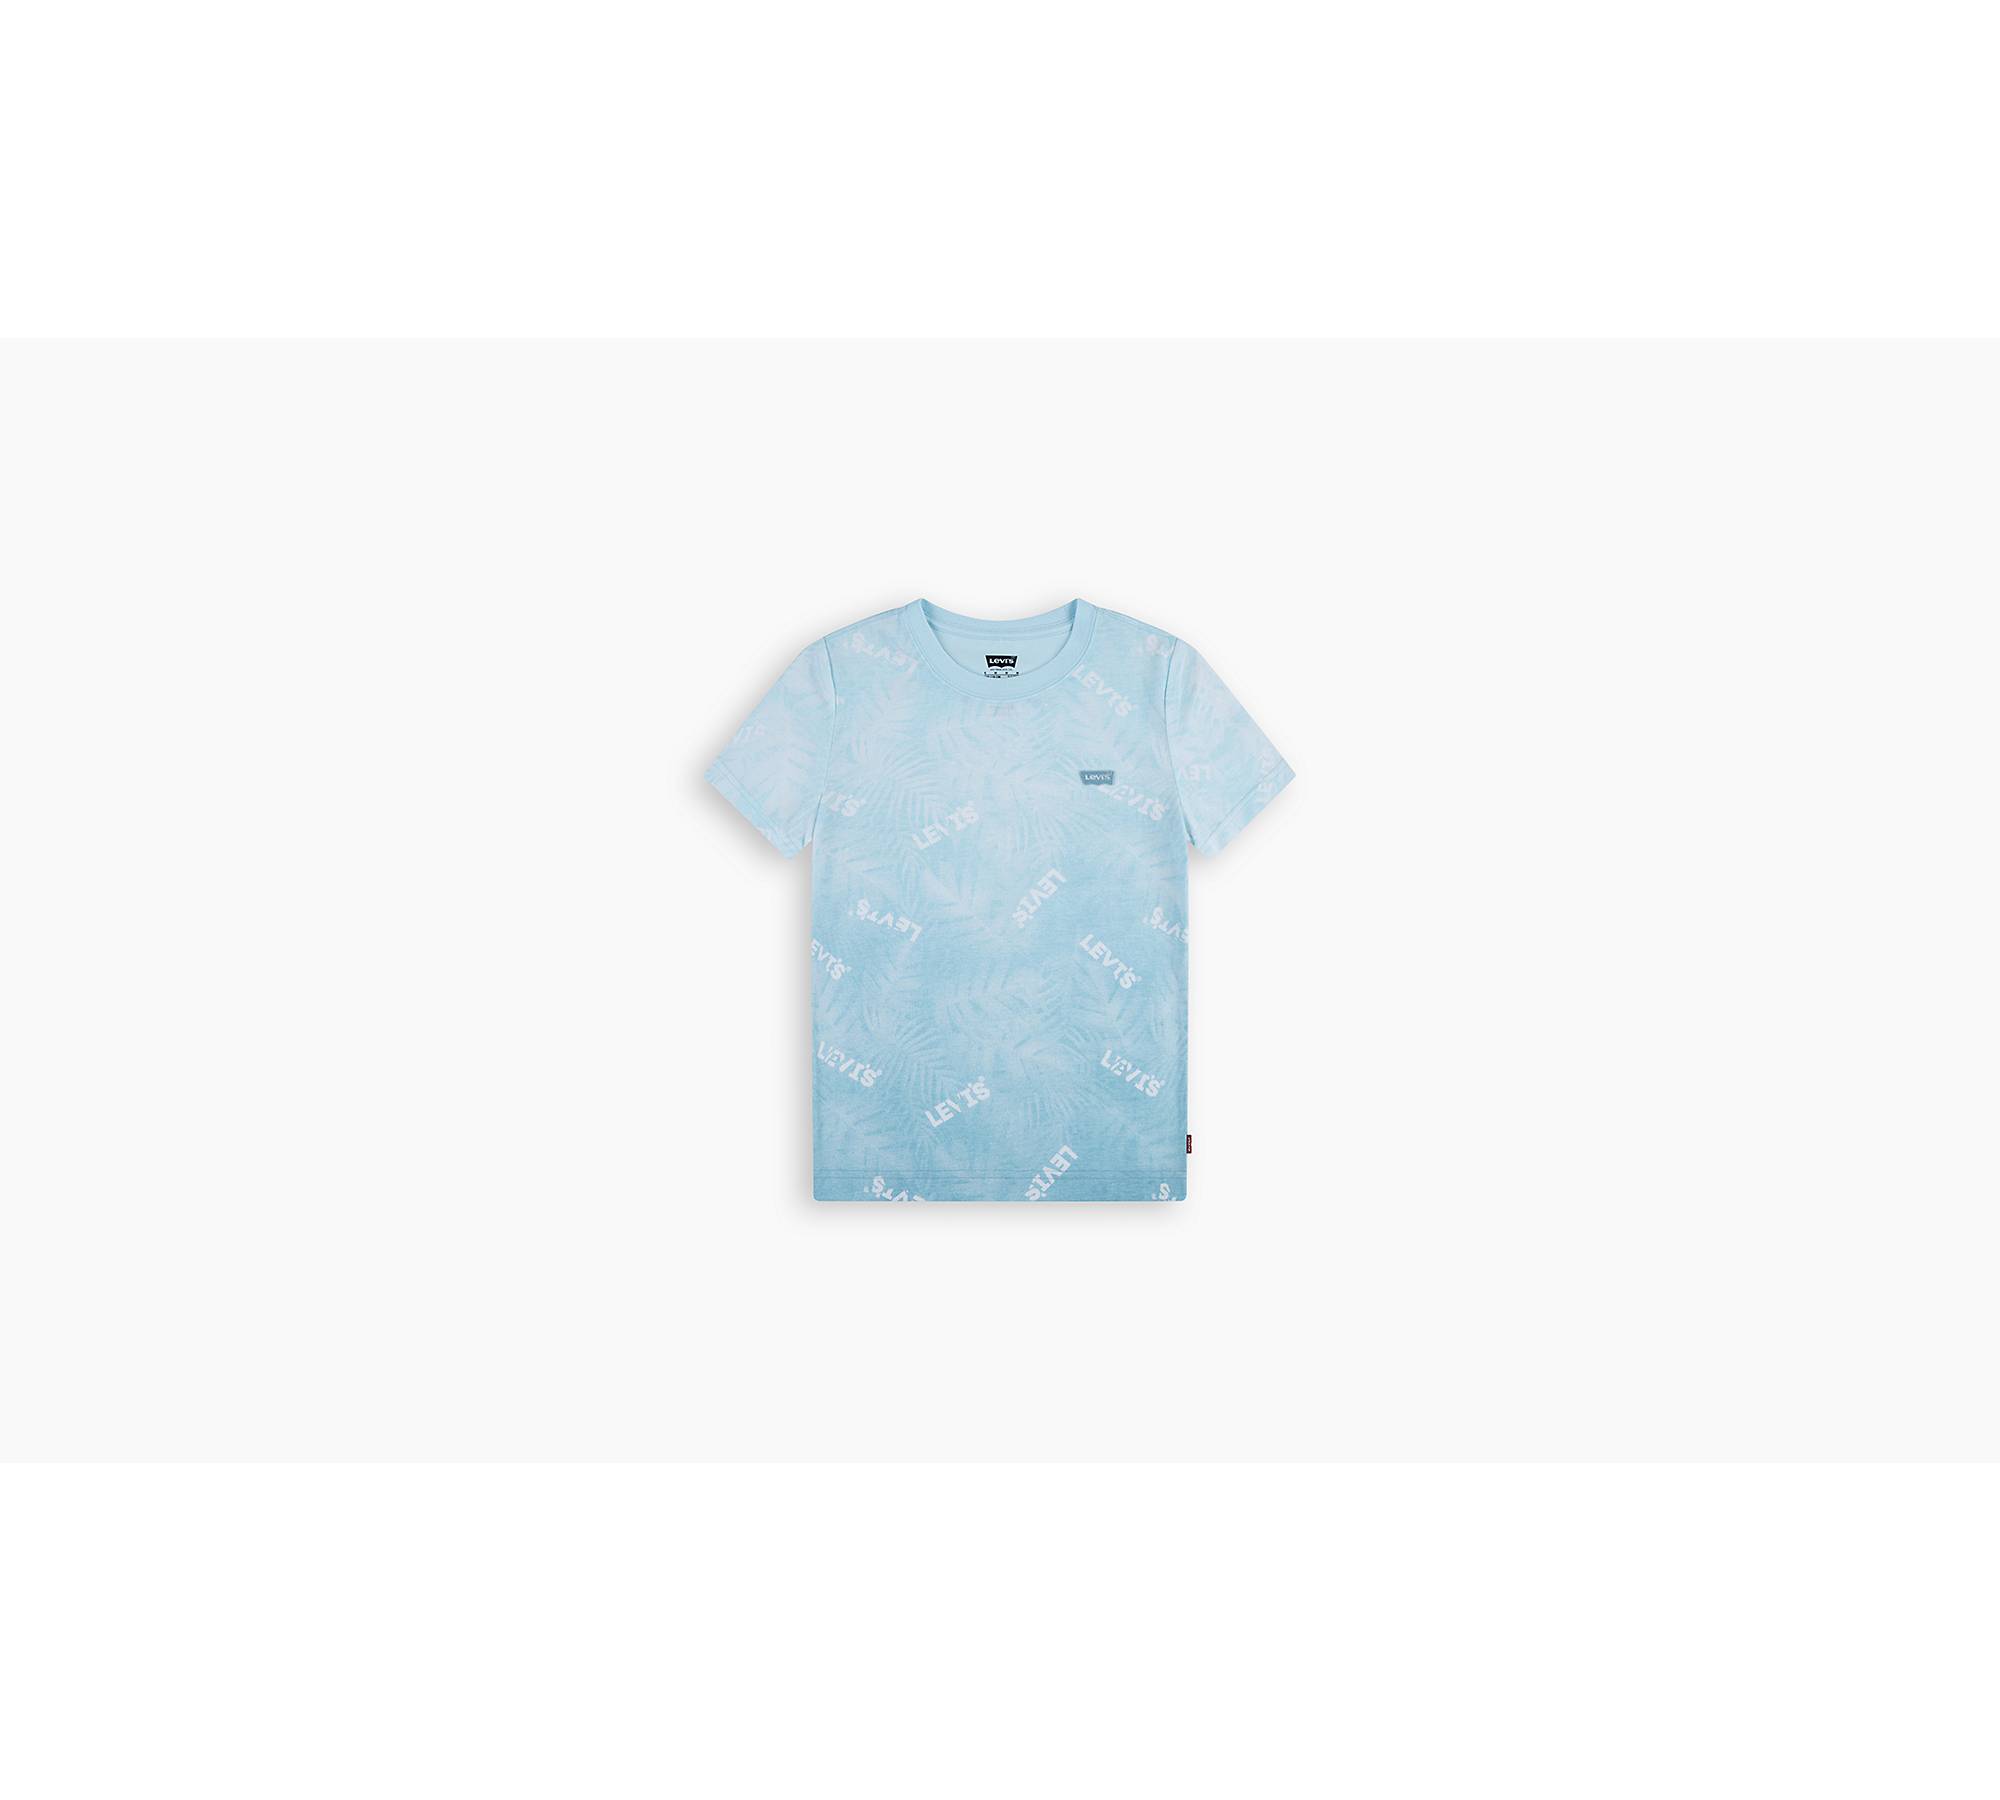 Enfant t-shirt Barely There Palm 1